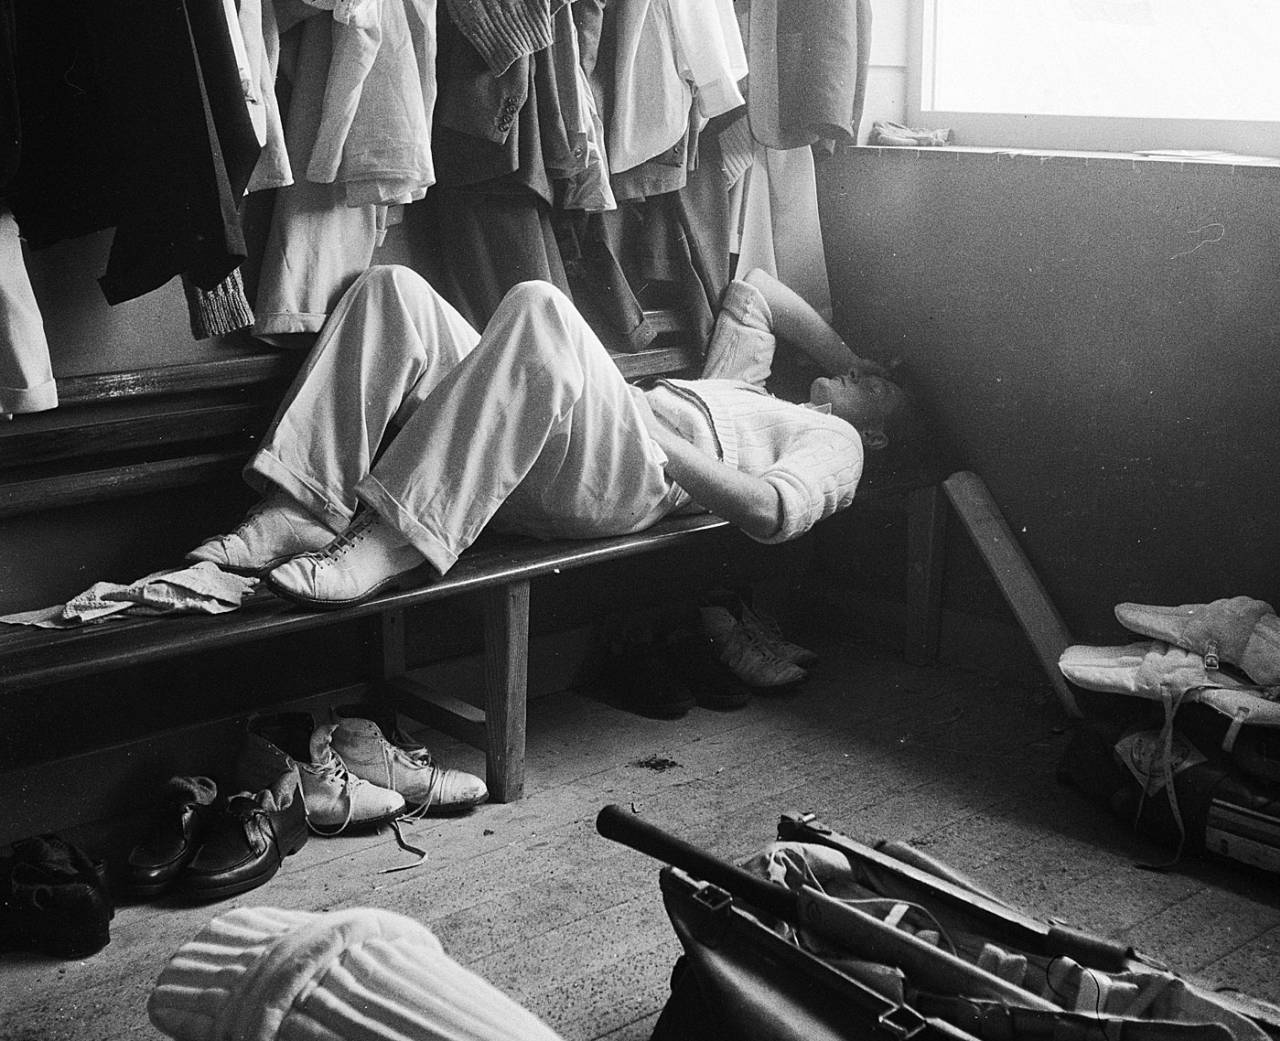 Peter Richardson takes a nap in the dressing room, England, May 25, 1956